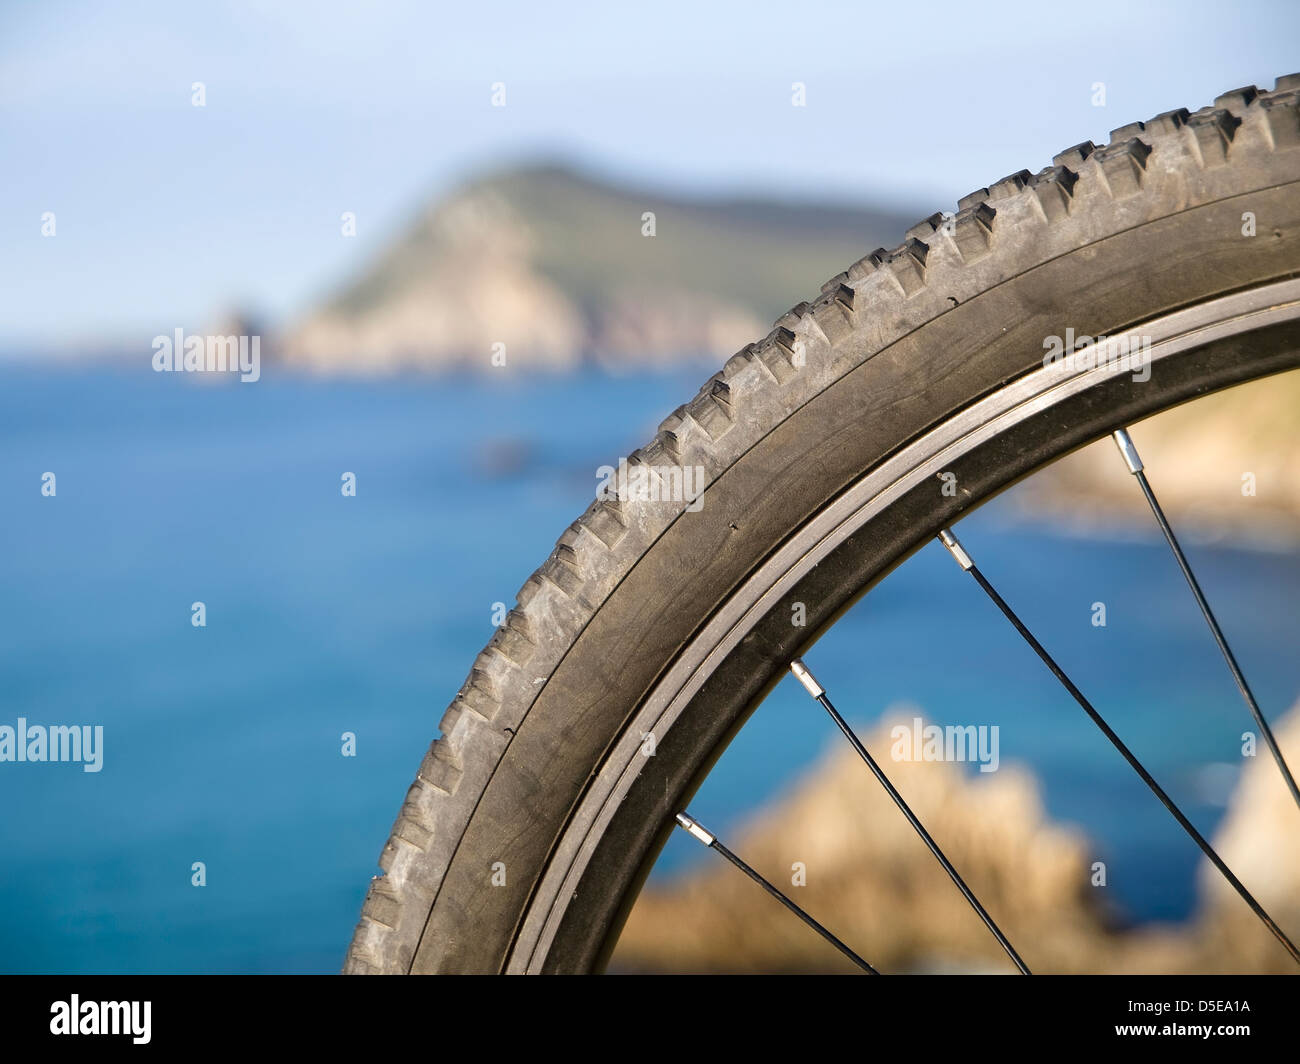 Mountain bike wheel with blurred landscape. In the picture below illustrates details of a mountain bike wheel and a seascape in Stock Photo